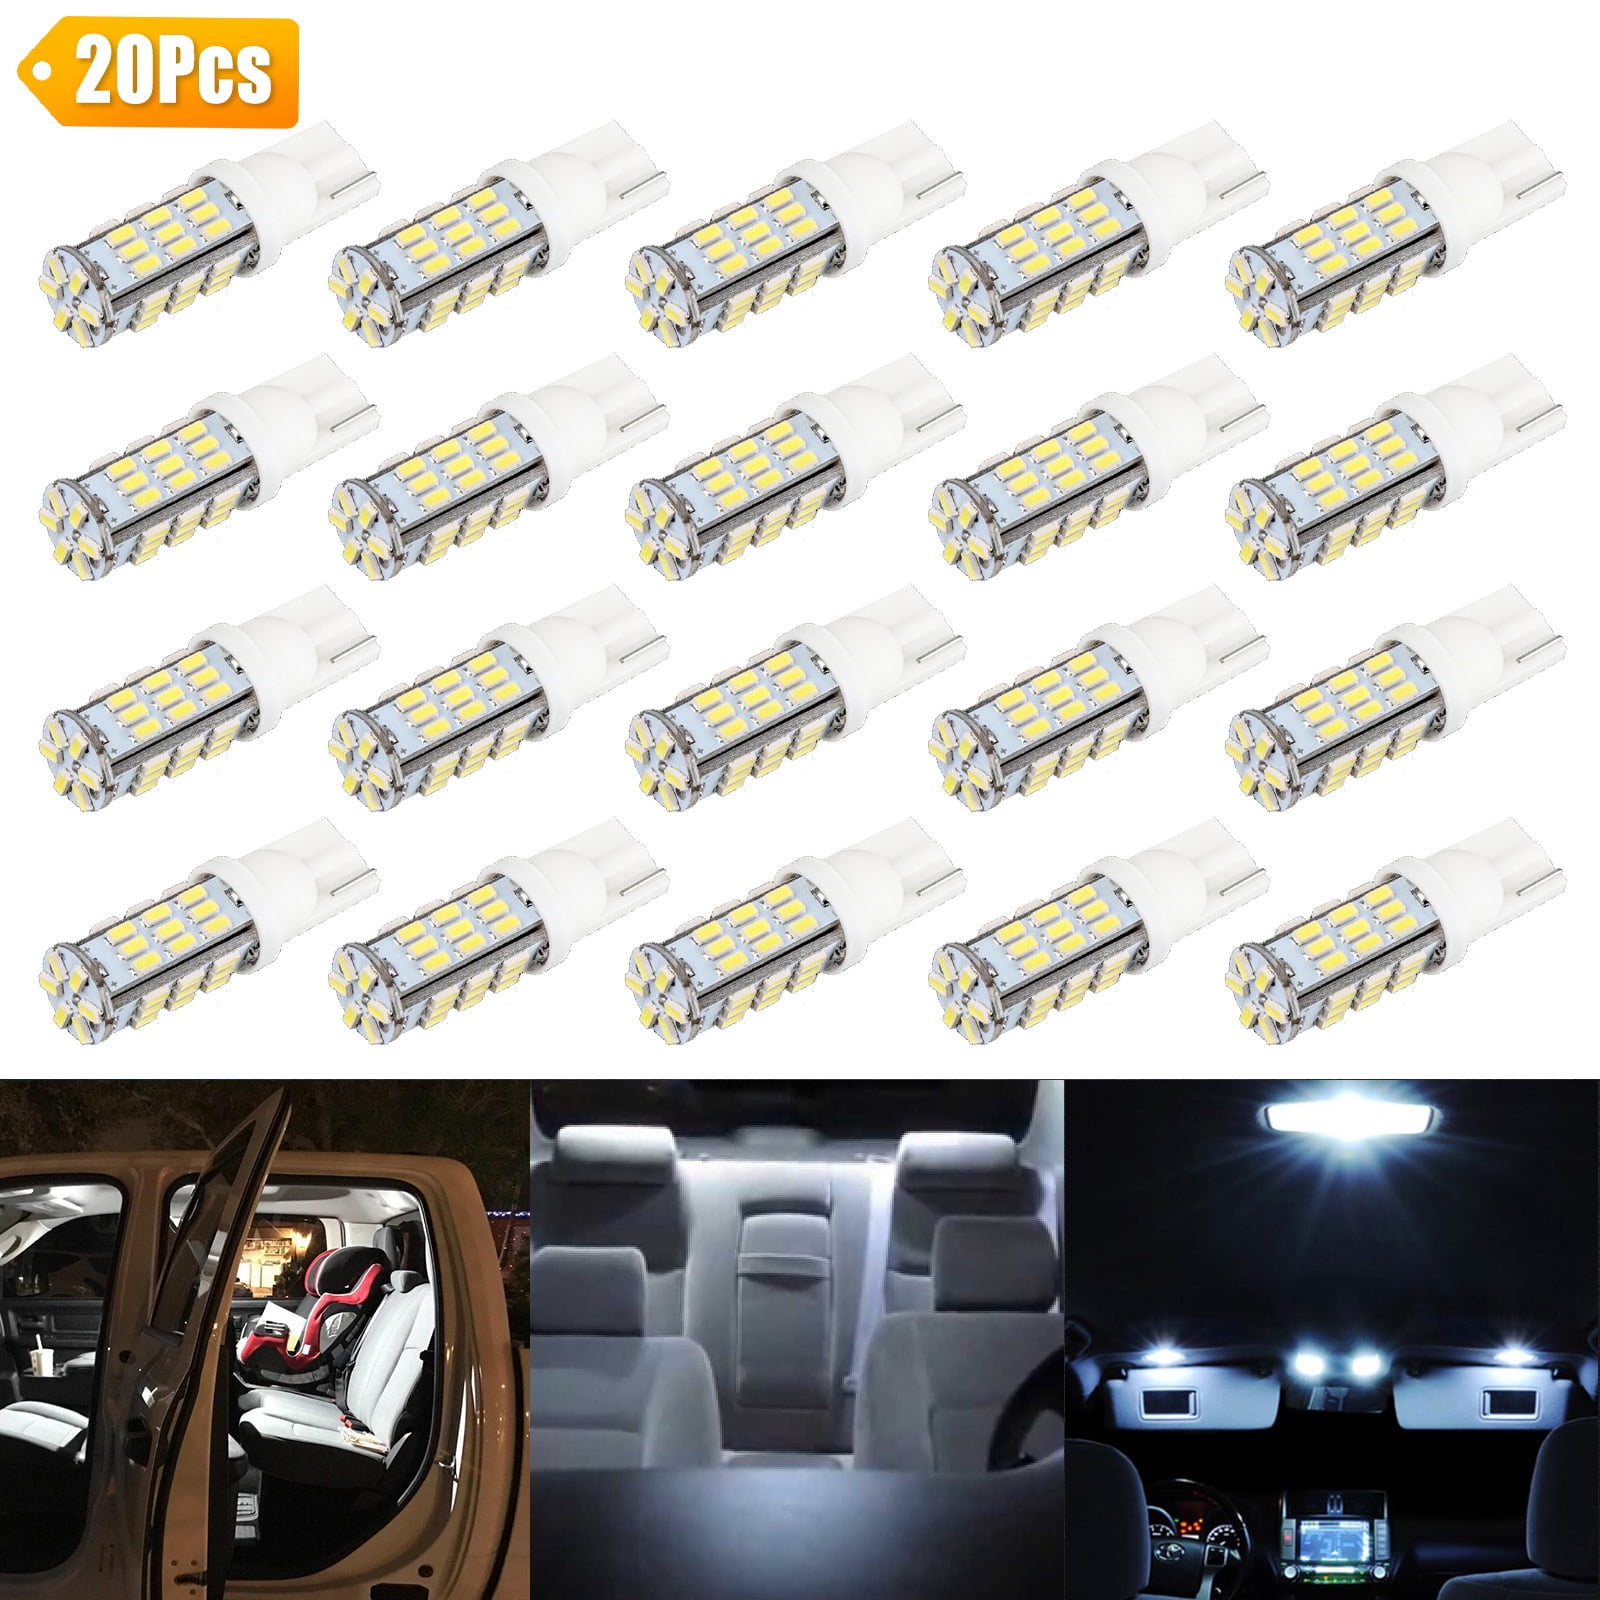 Backup Reverse Lights ACOHUIKE T10 921 194 168 175 LED Bulbs White 20-Packs Super Bright 3014 42-SMD LED Replacement 12 Volt RV Camper Trailer Boat Trunk Interior Dome Map License Lights 